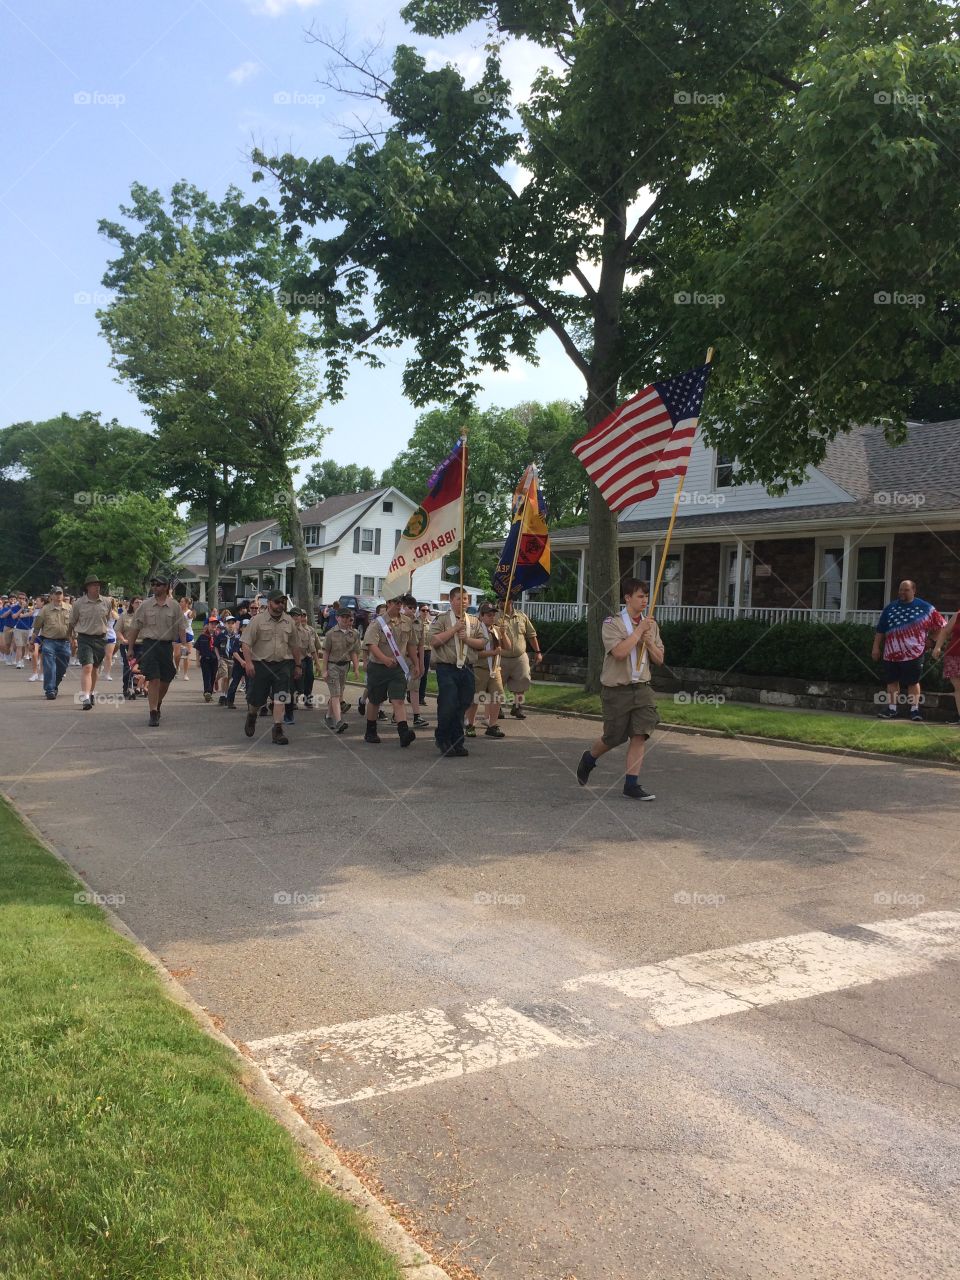 Another parade part, Boy Scouts An band behind them